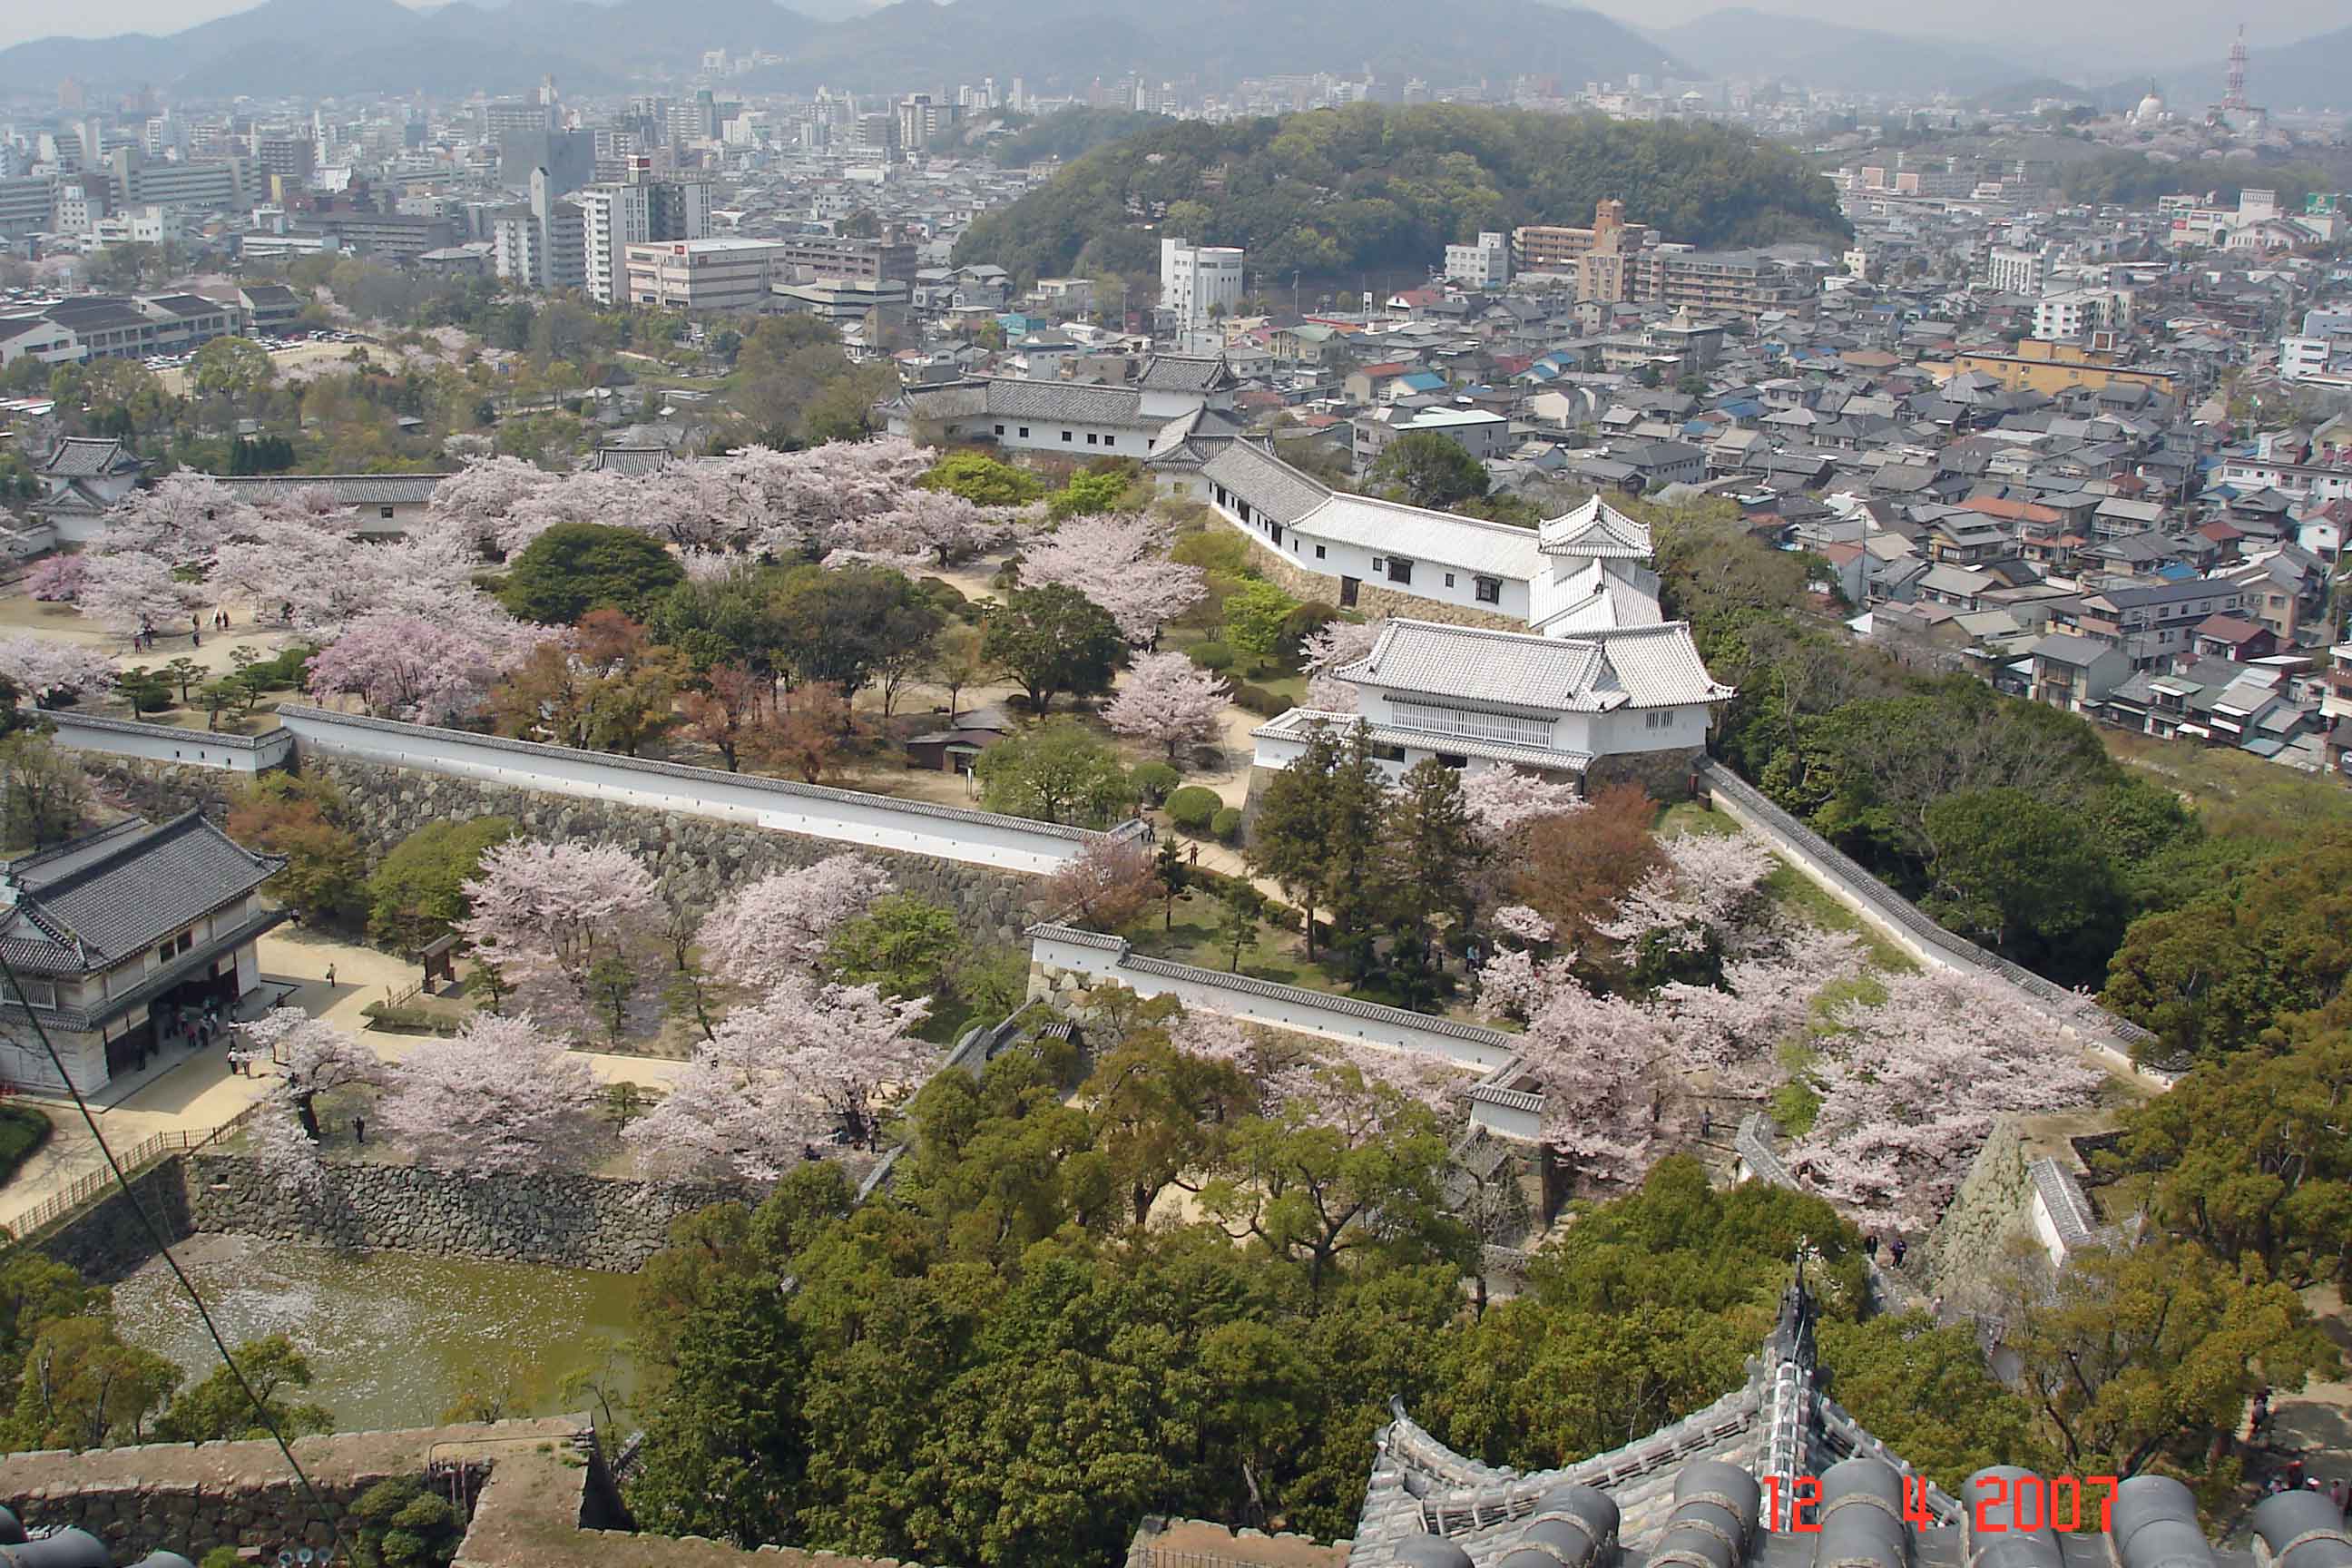 View from Main Tower across West Bailey- Himeji city